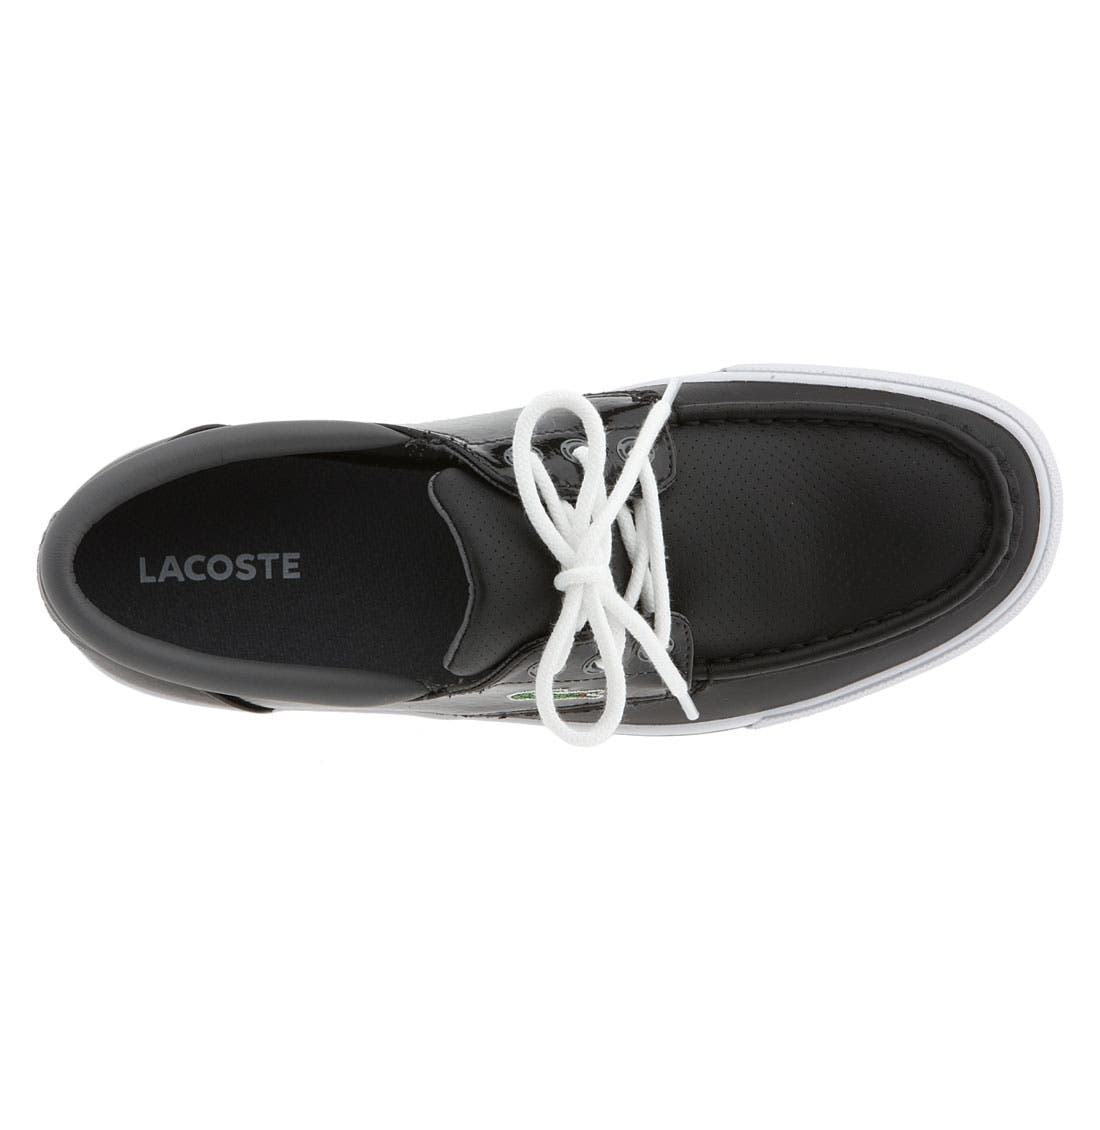 lacoste shakespeare shoes